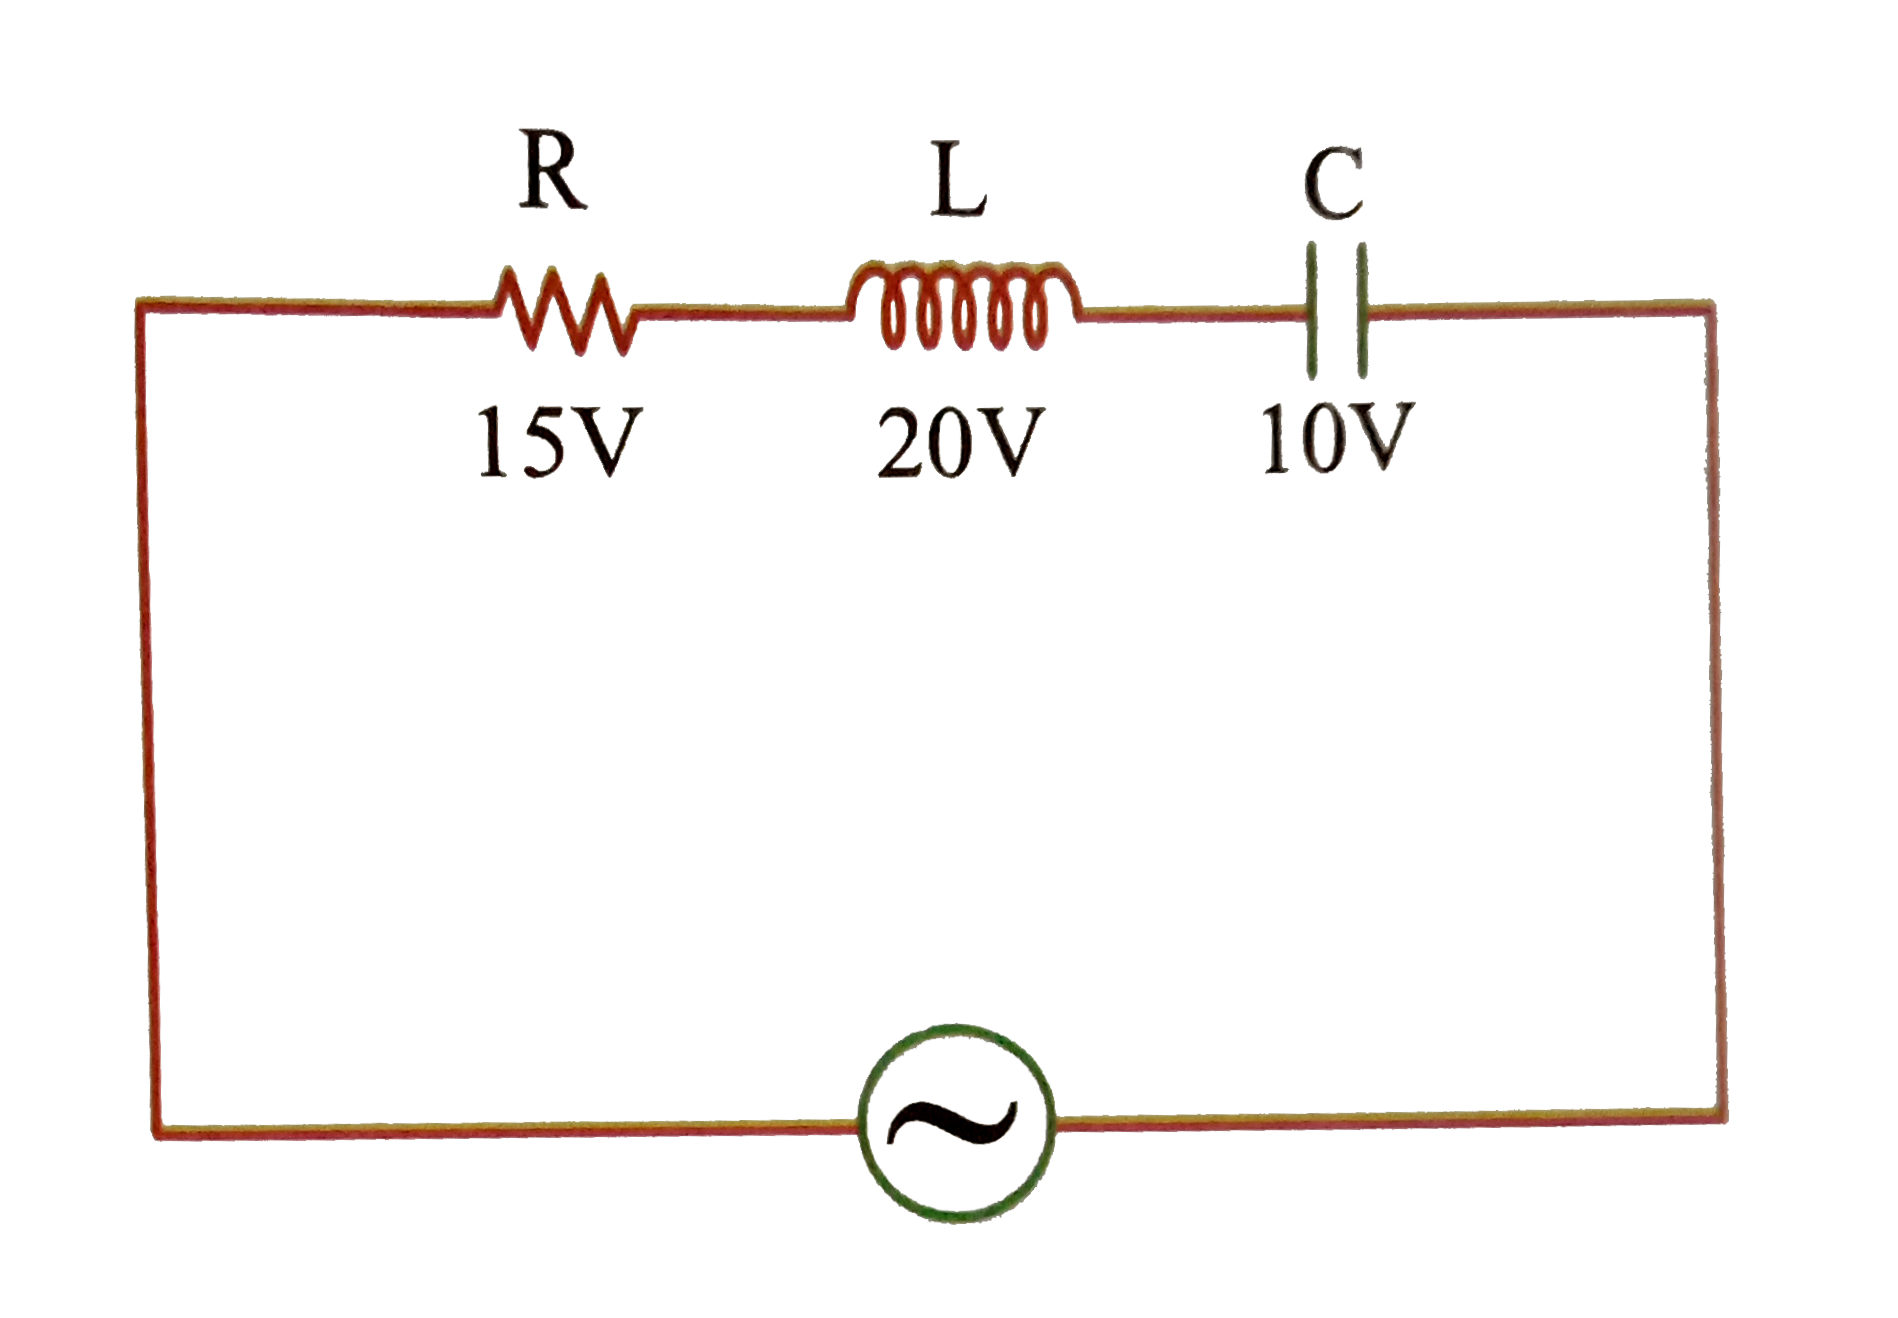 In the circuit as shown in the figure, if value of R = 60 Omega, then the current flowing through the condenser will be